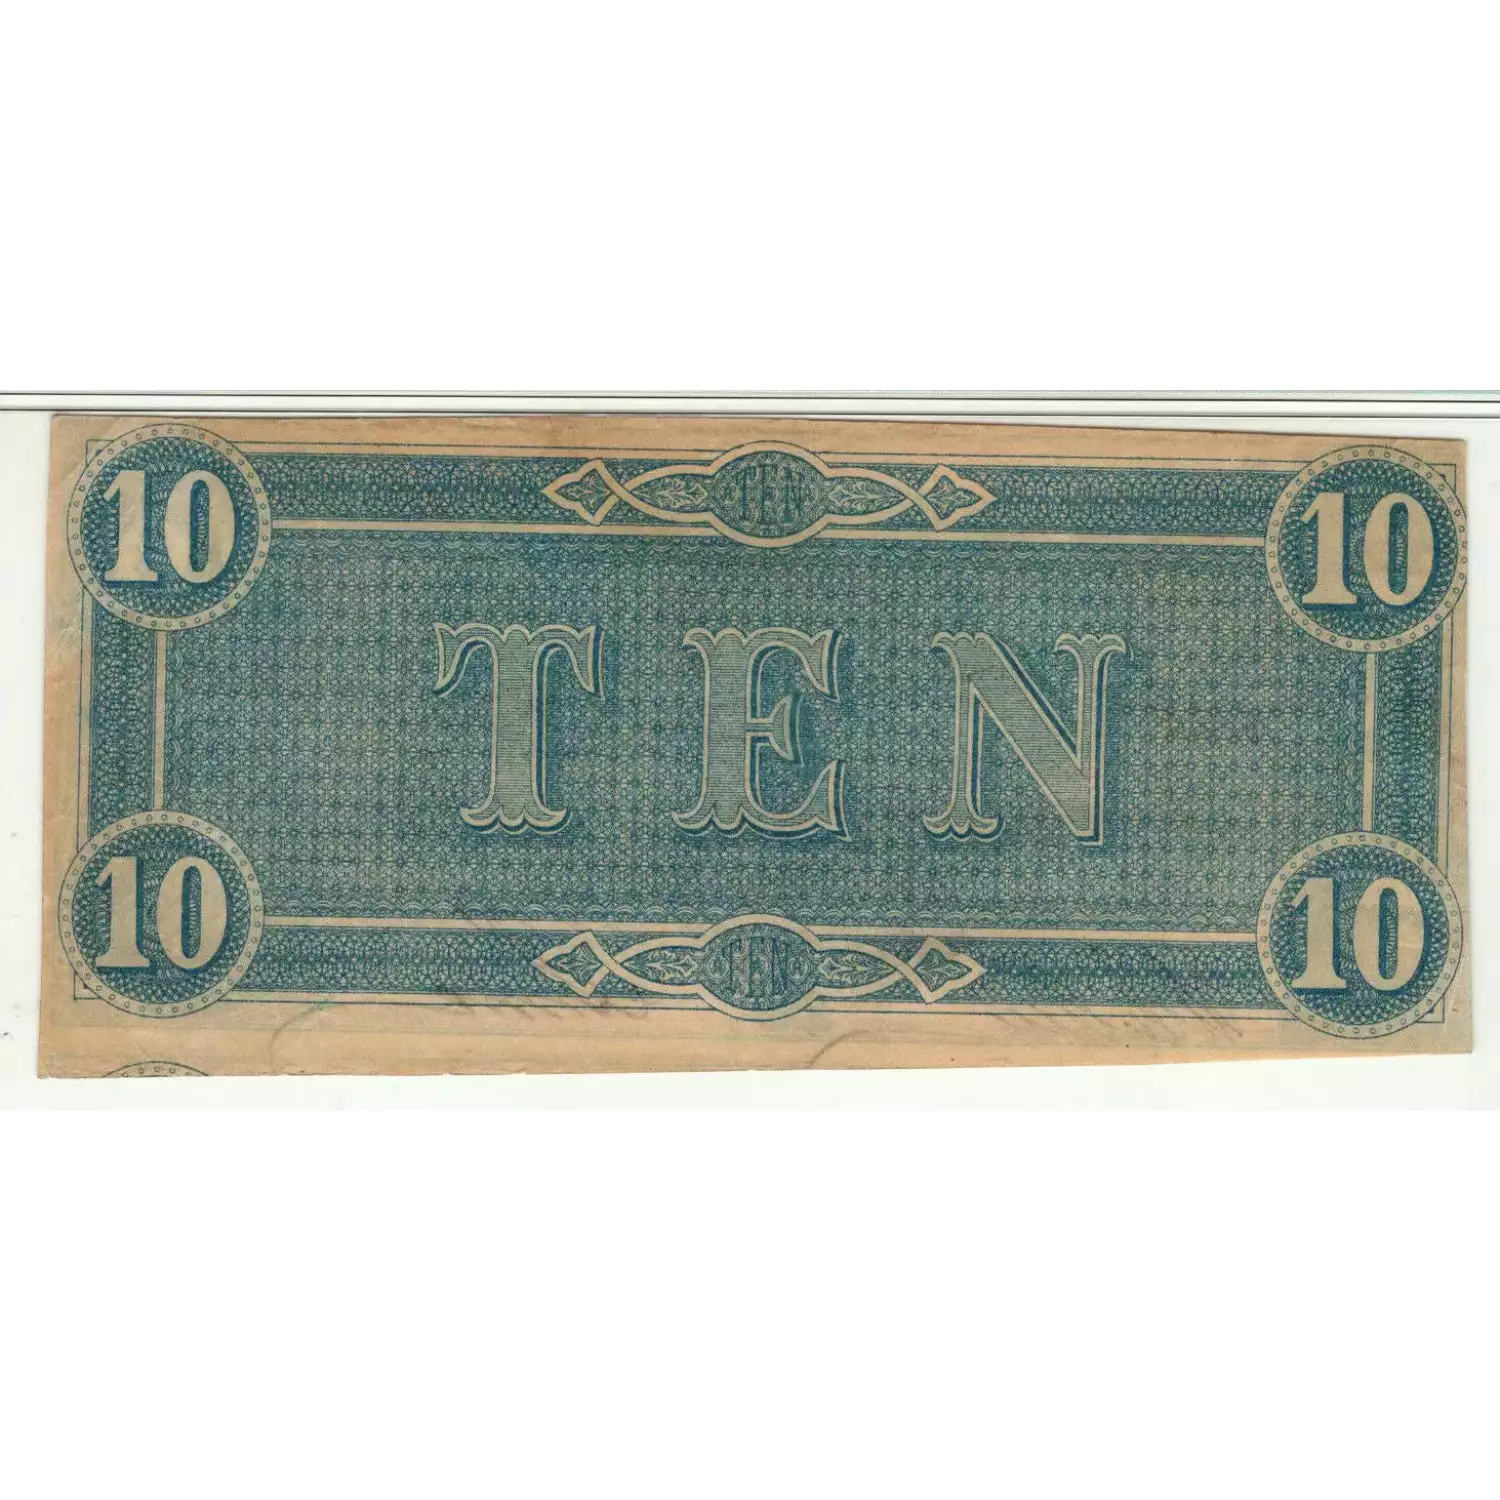 5s March 13, 1755  COLONIAL CURRENCY CT-68 (4)